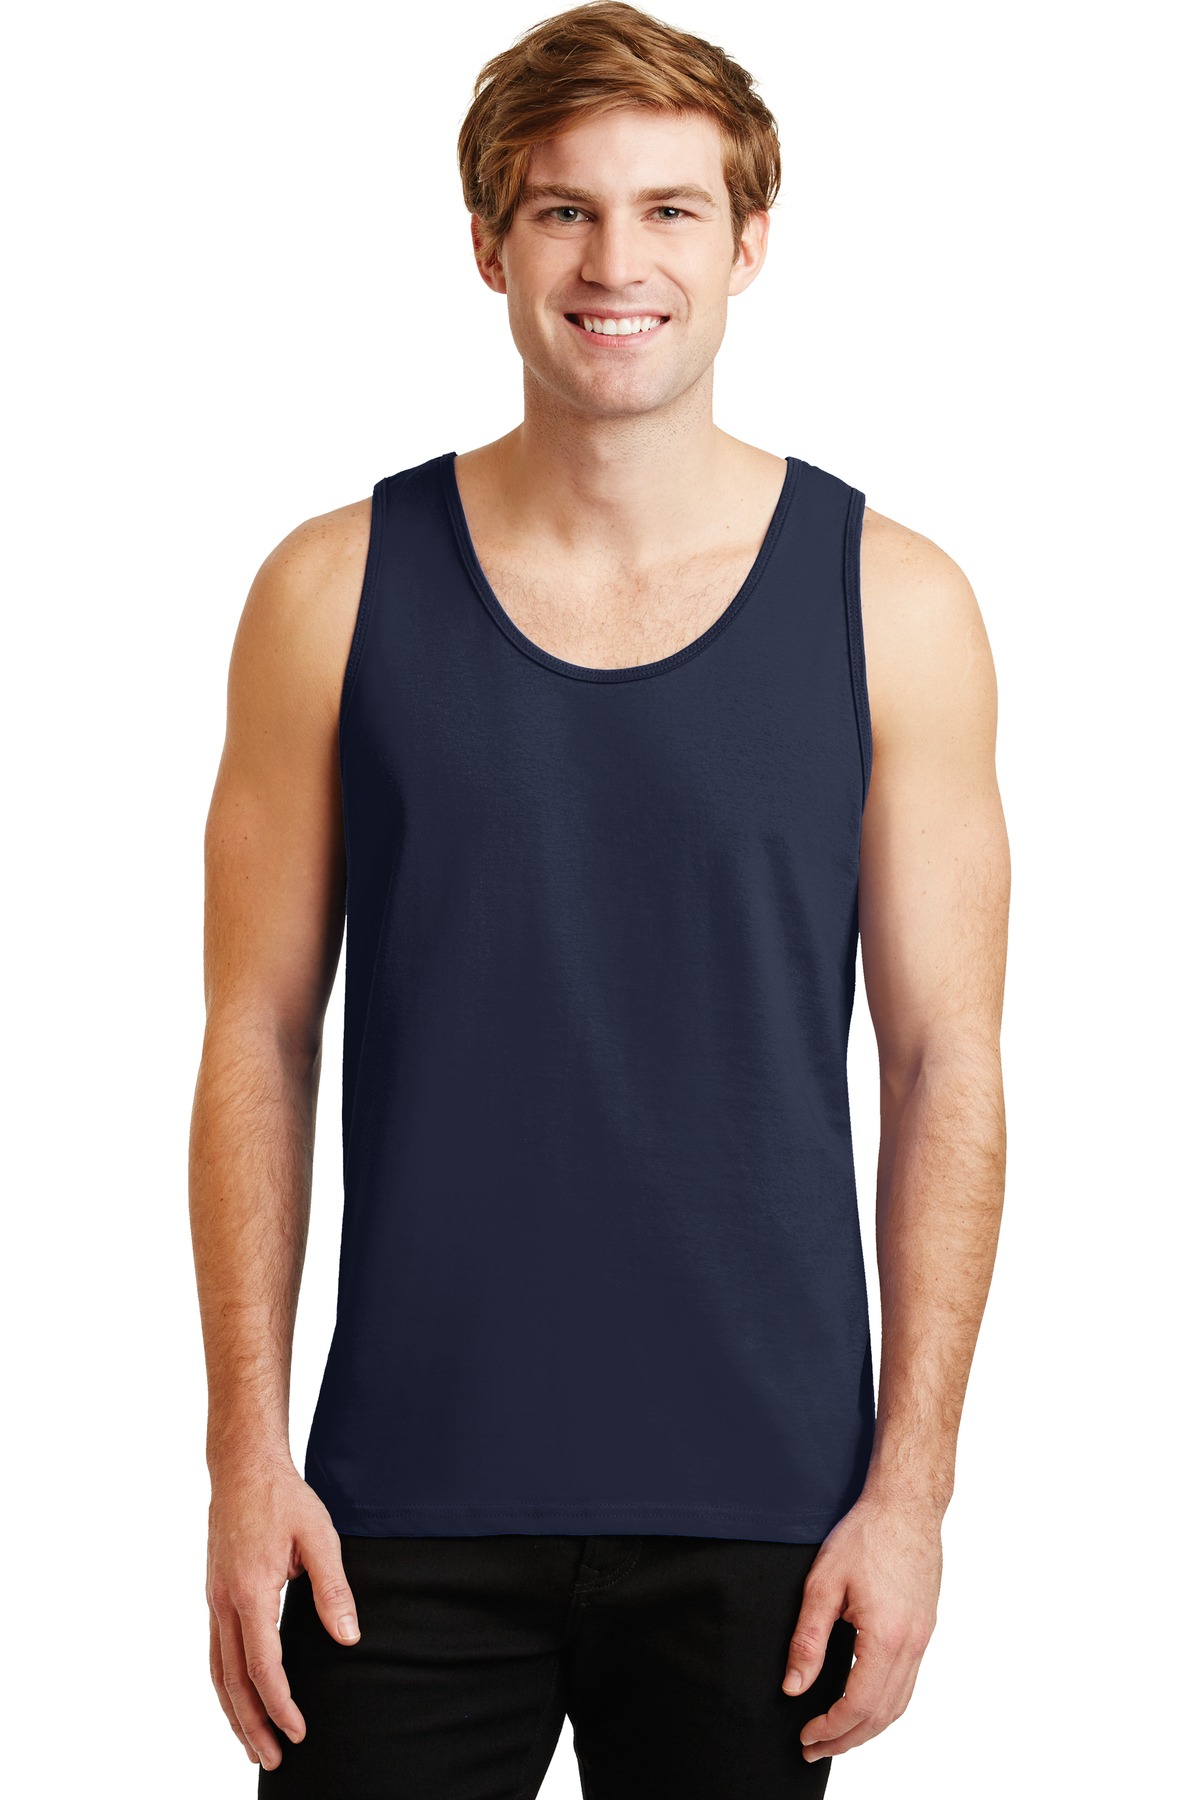 Normal is Boring - Men's Tank Top for Men, up to Men Size 3XL - San Francisco - image 2 of 5